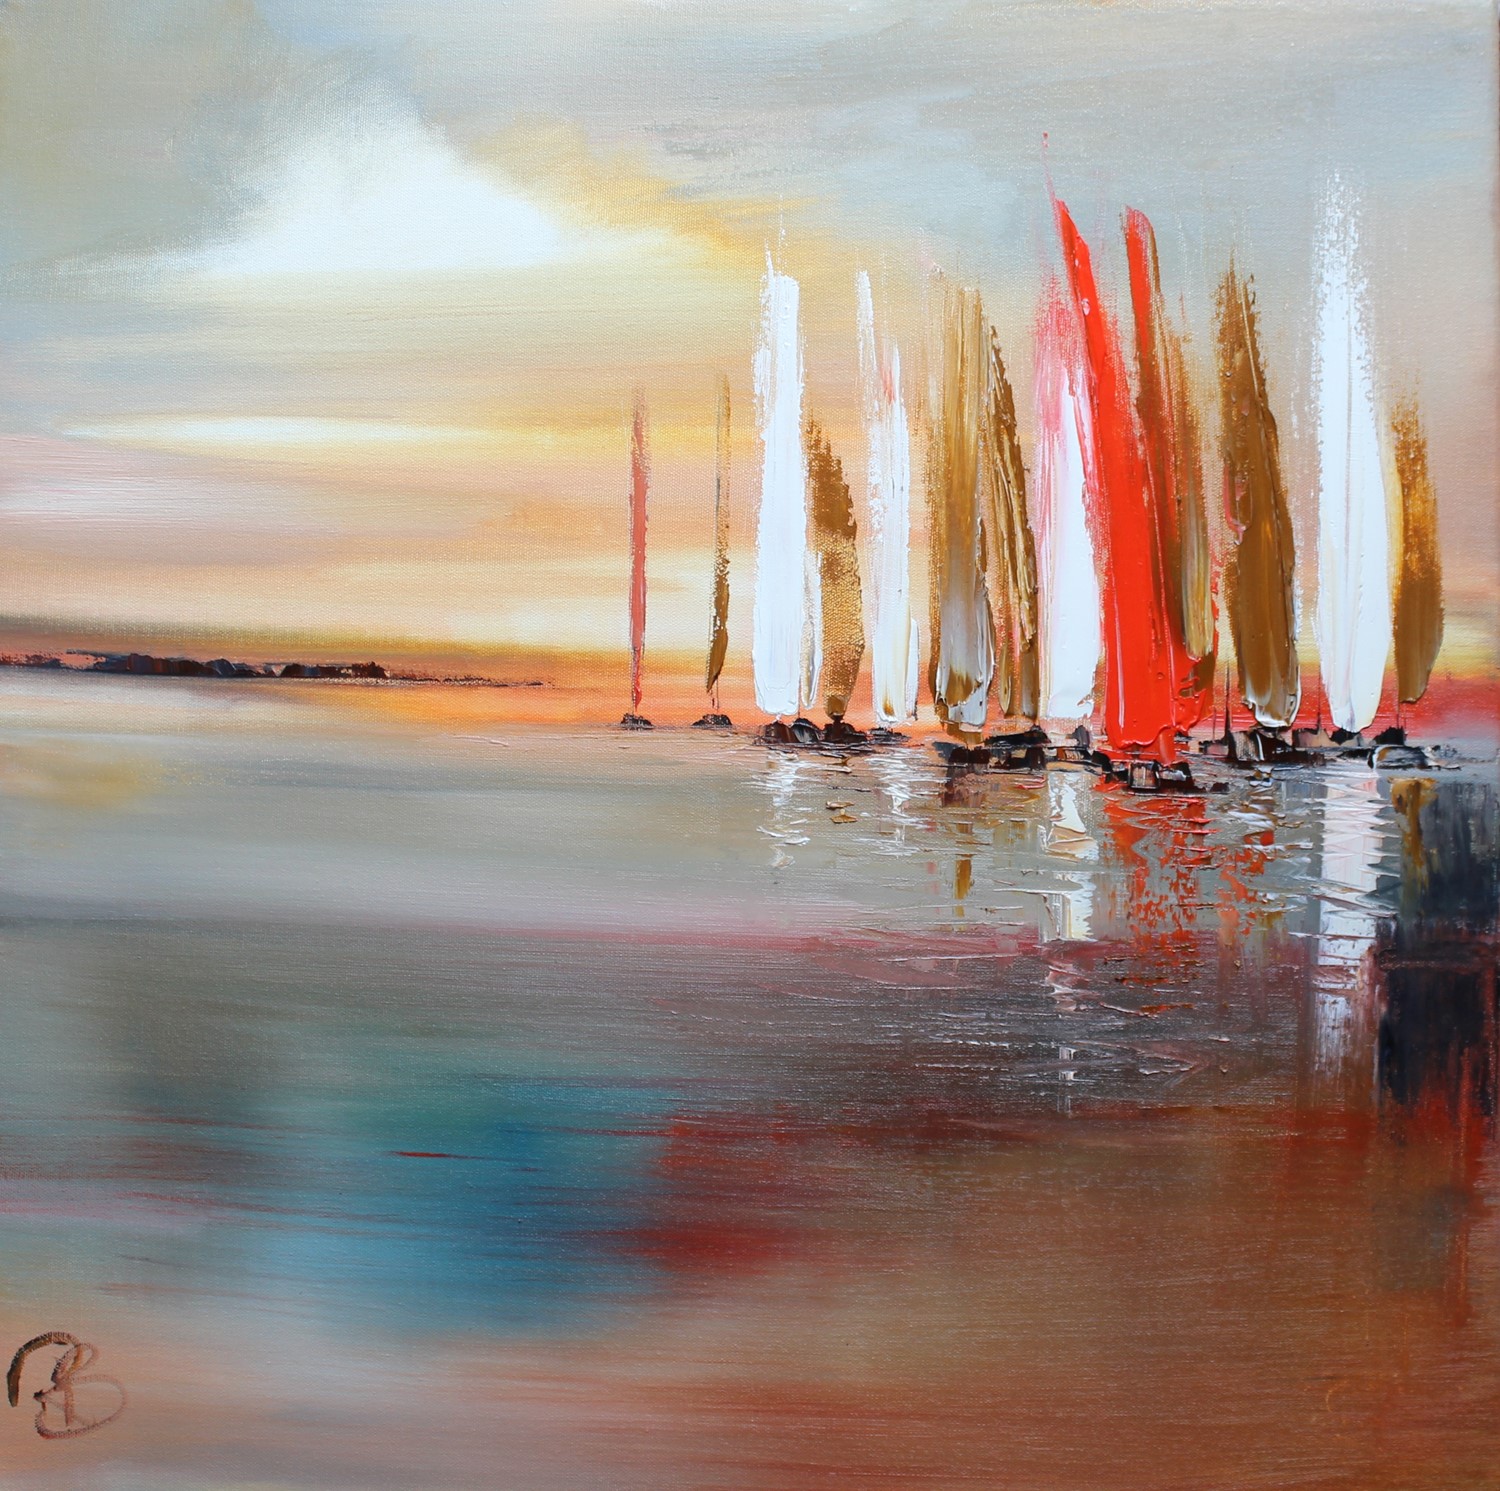 'At the Break of Day' by artist Rosanne Barr